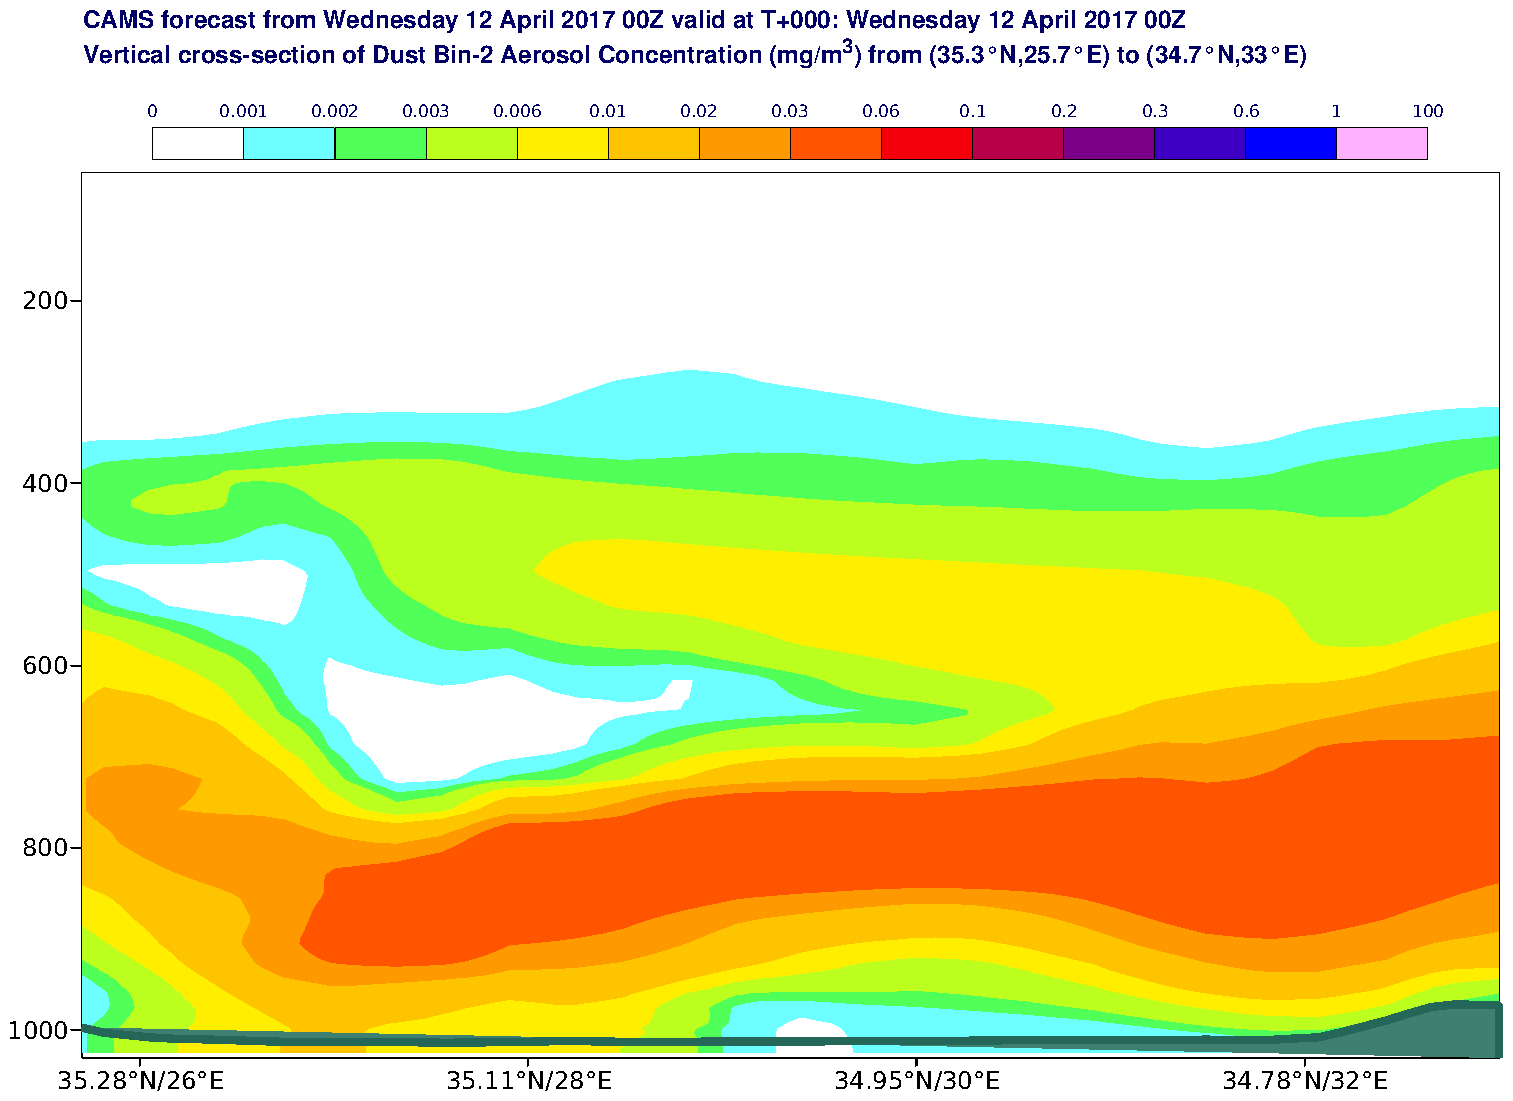 Vertical cross-section of Dust Bin-2 Aerosol Concentration (mg/m3) valid at T0 - 2017-04-12 00:00